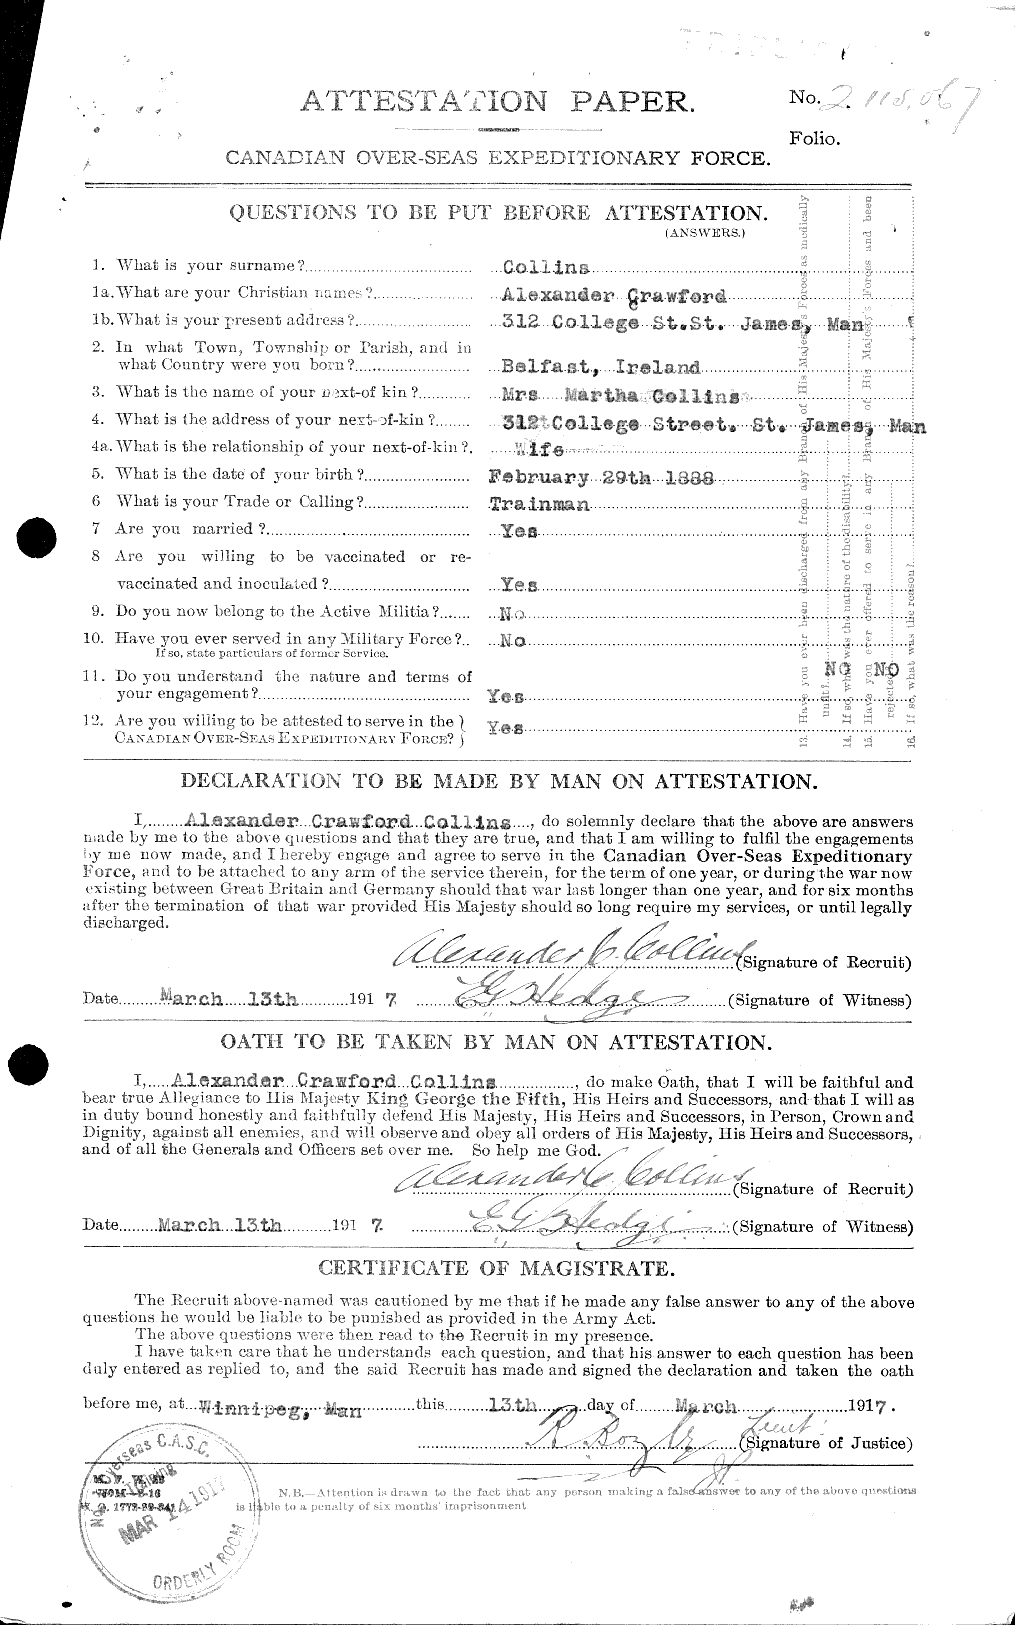 Personnel Records of the First World War - CEF 028940a